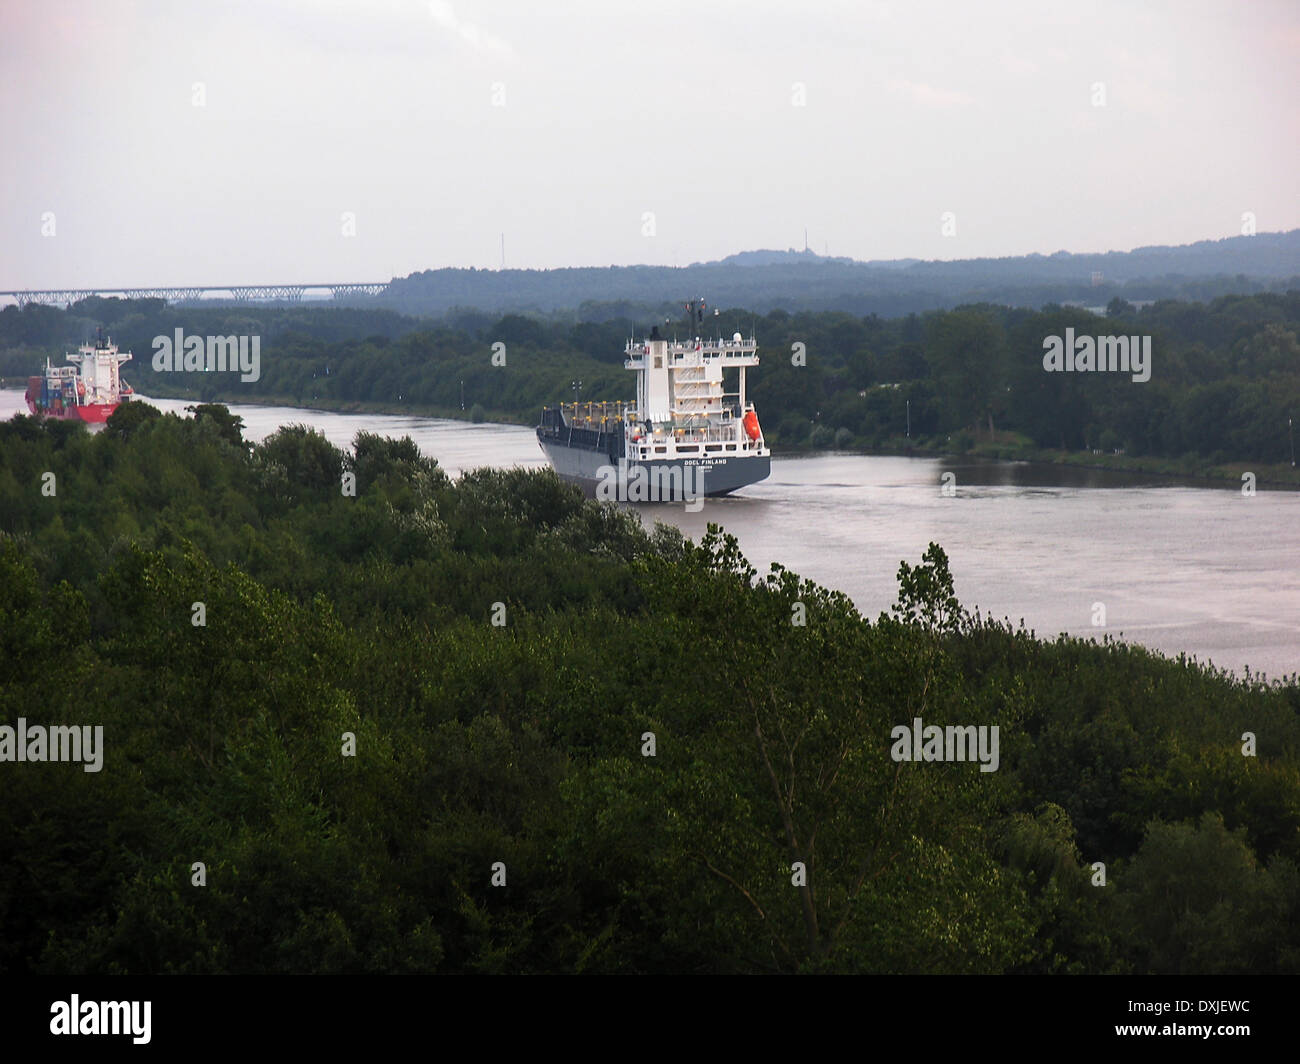 The Kiel Canal near Brunsbuttel. The Kiel Canal connects the North Sea with the Baltic Sea (Kiel Fjord). This waterway is the most frequented artificial waterway in the world based on the number of ships. Photo: Klaus Nowottnick Date: August 15, 2006 Stock Photo